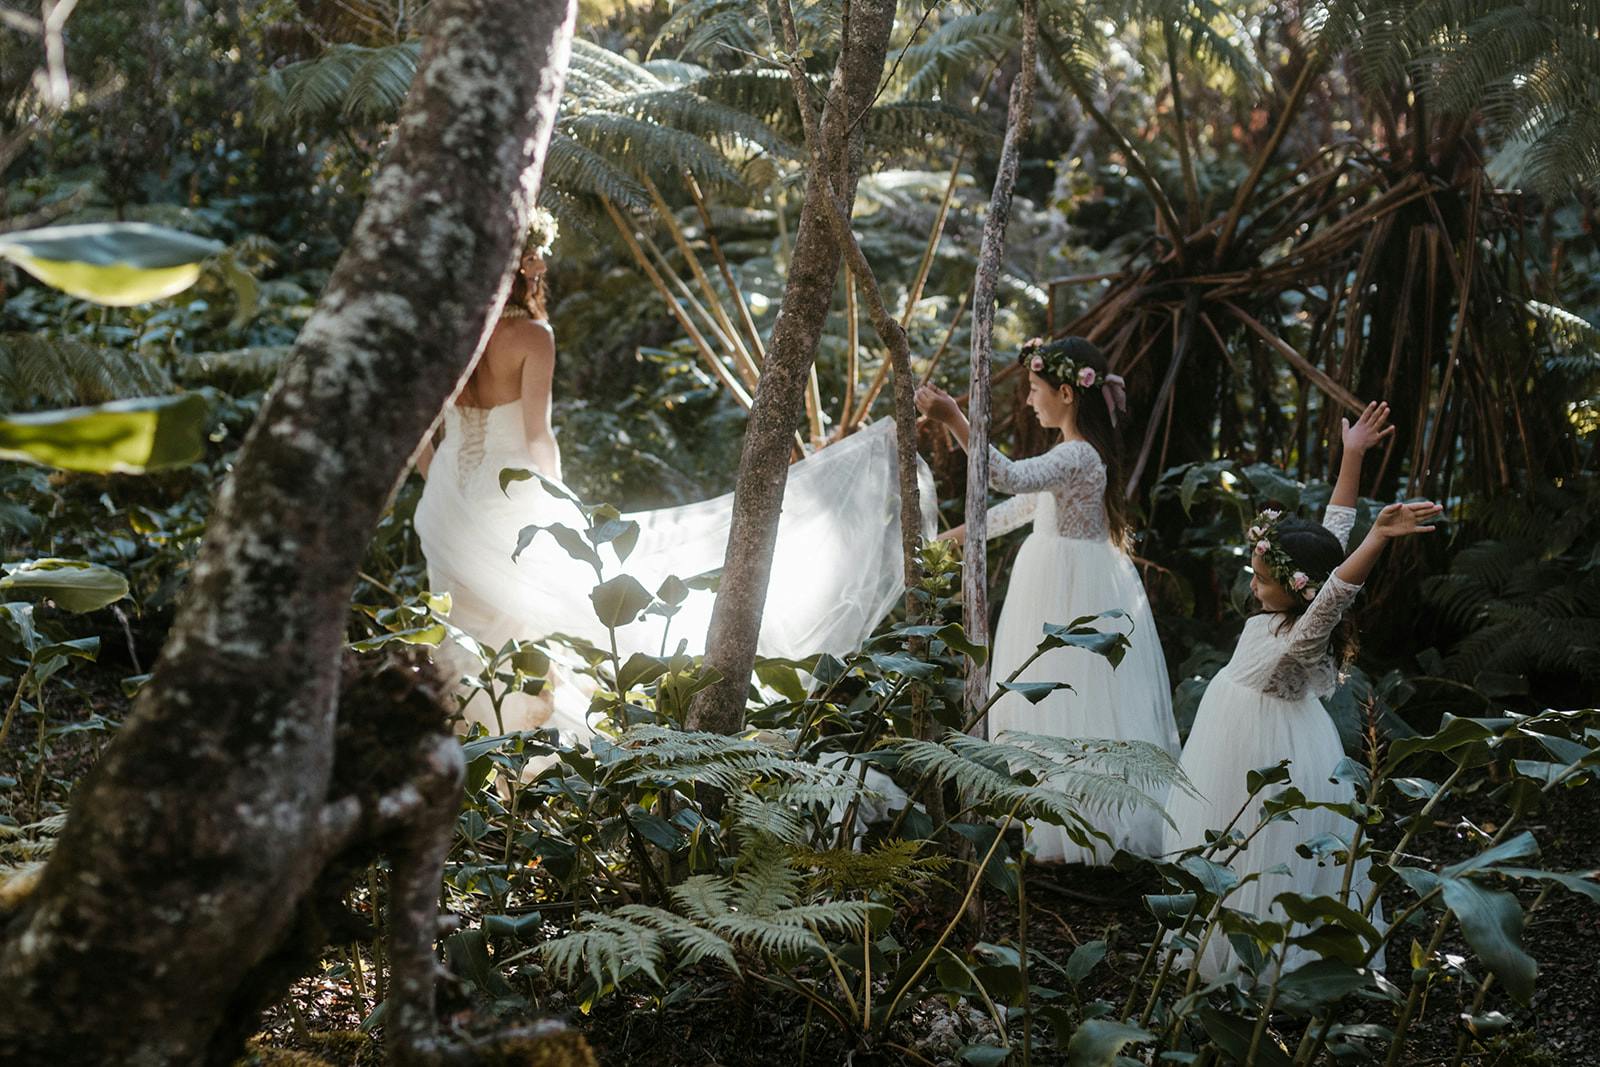 Luxury Hawaii wedding photography for an exclusive experience